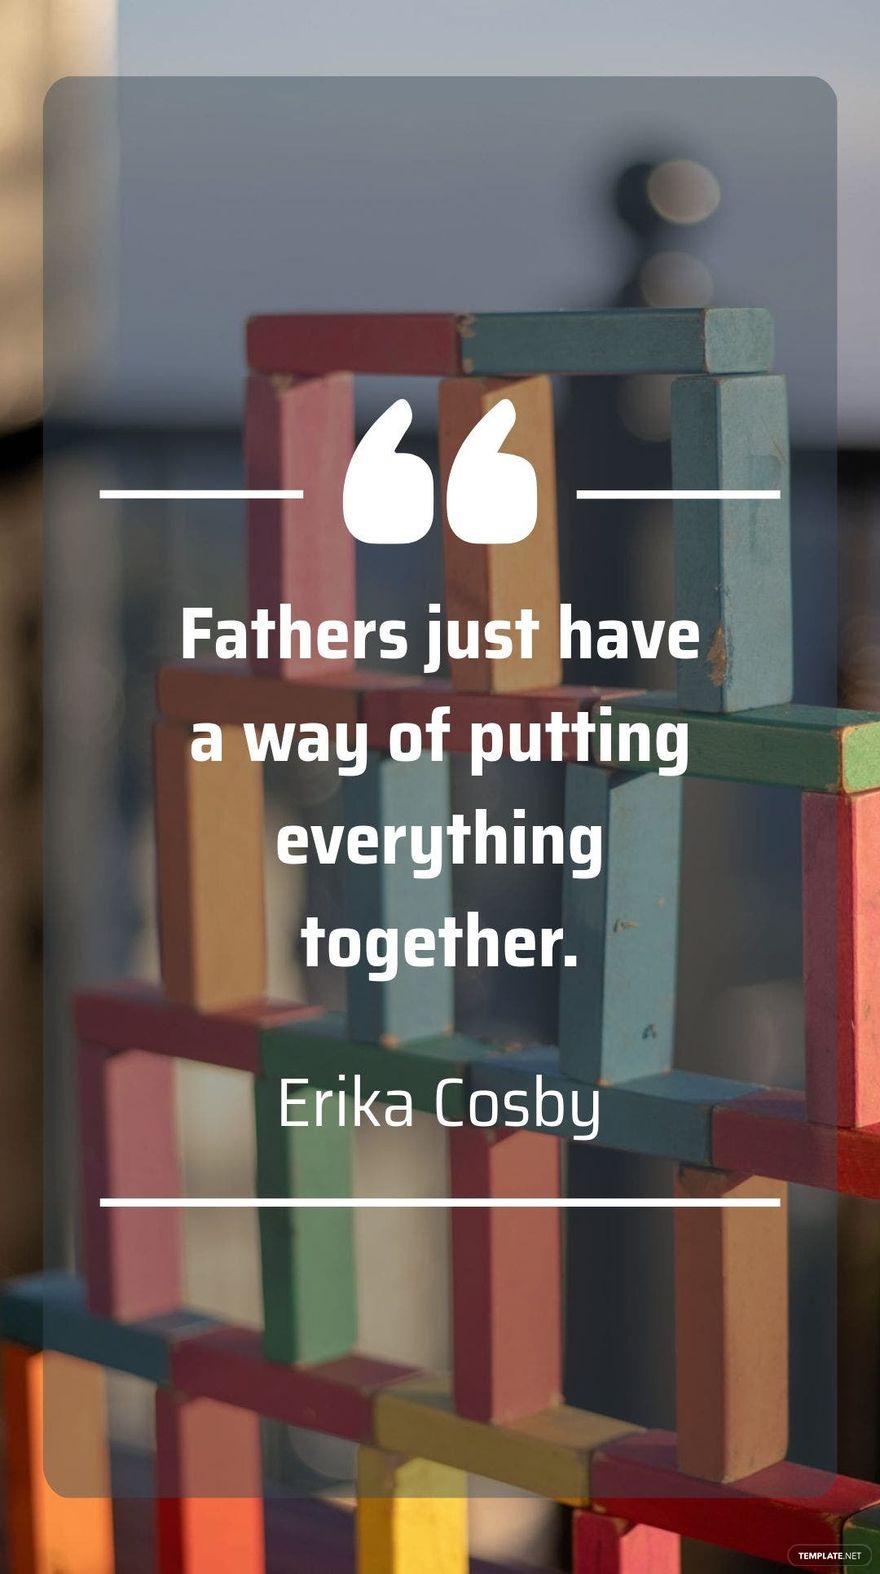 Erika Cosby - “Fathers just have a way of putting everything together.” in JPG